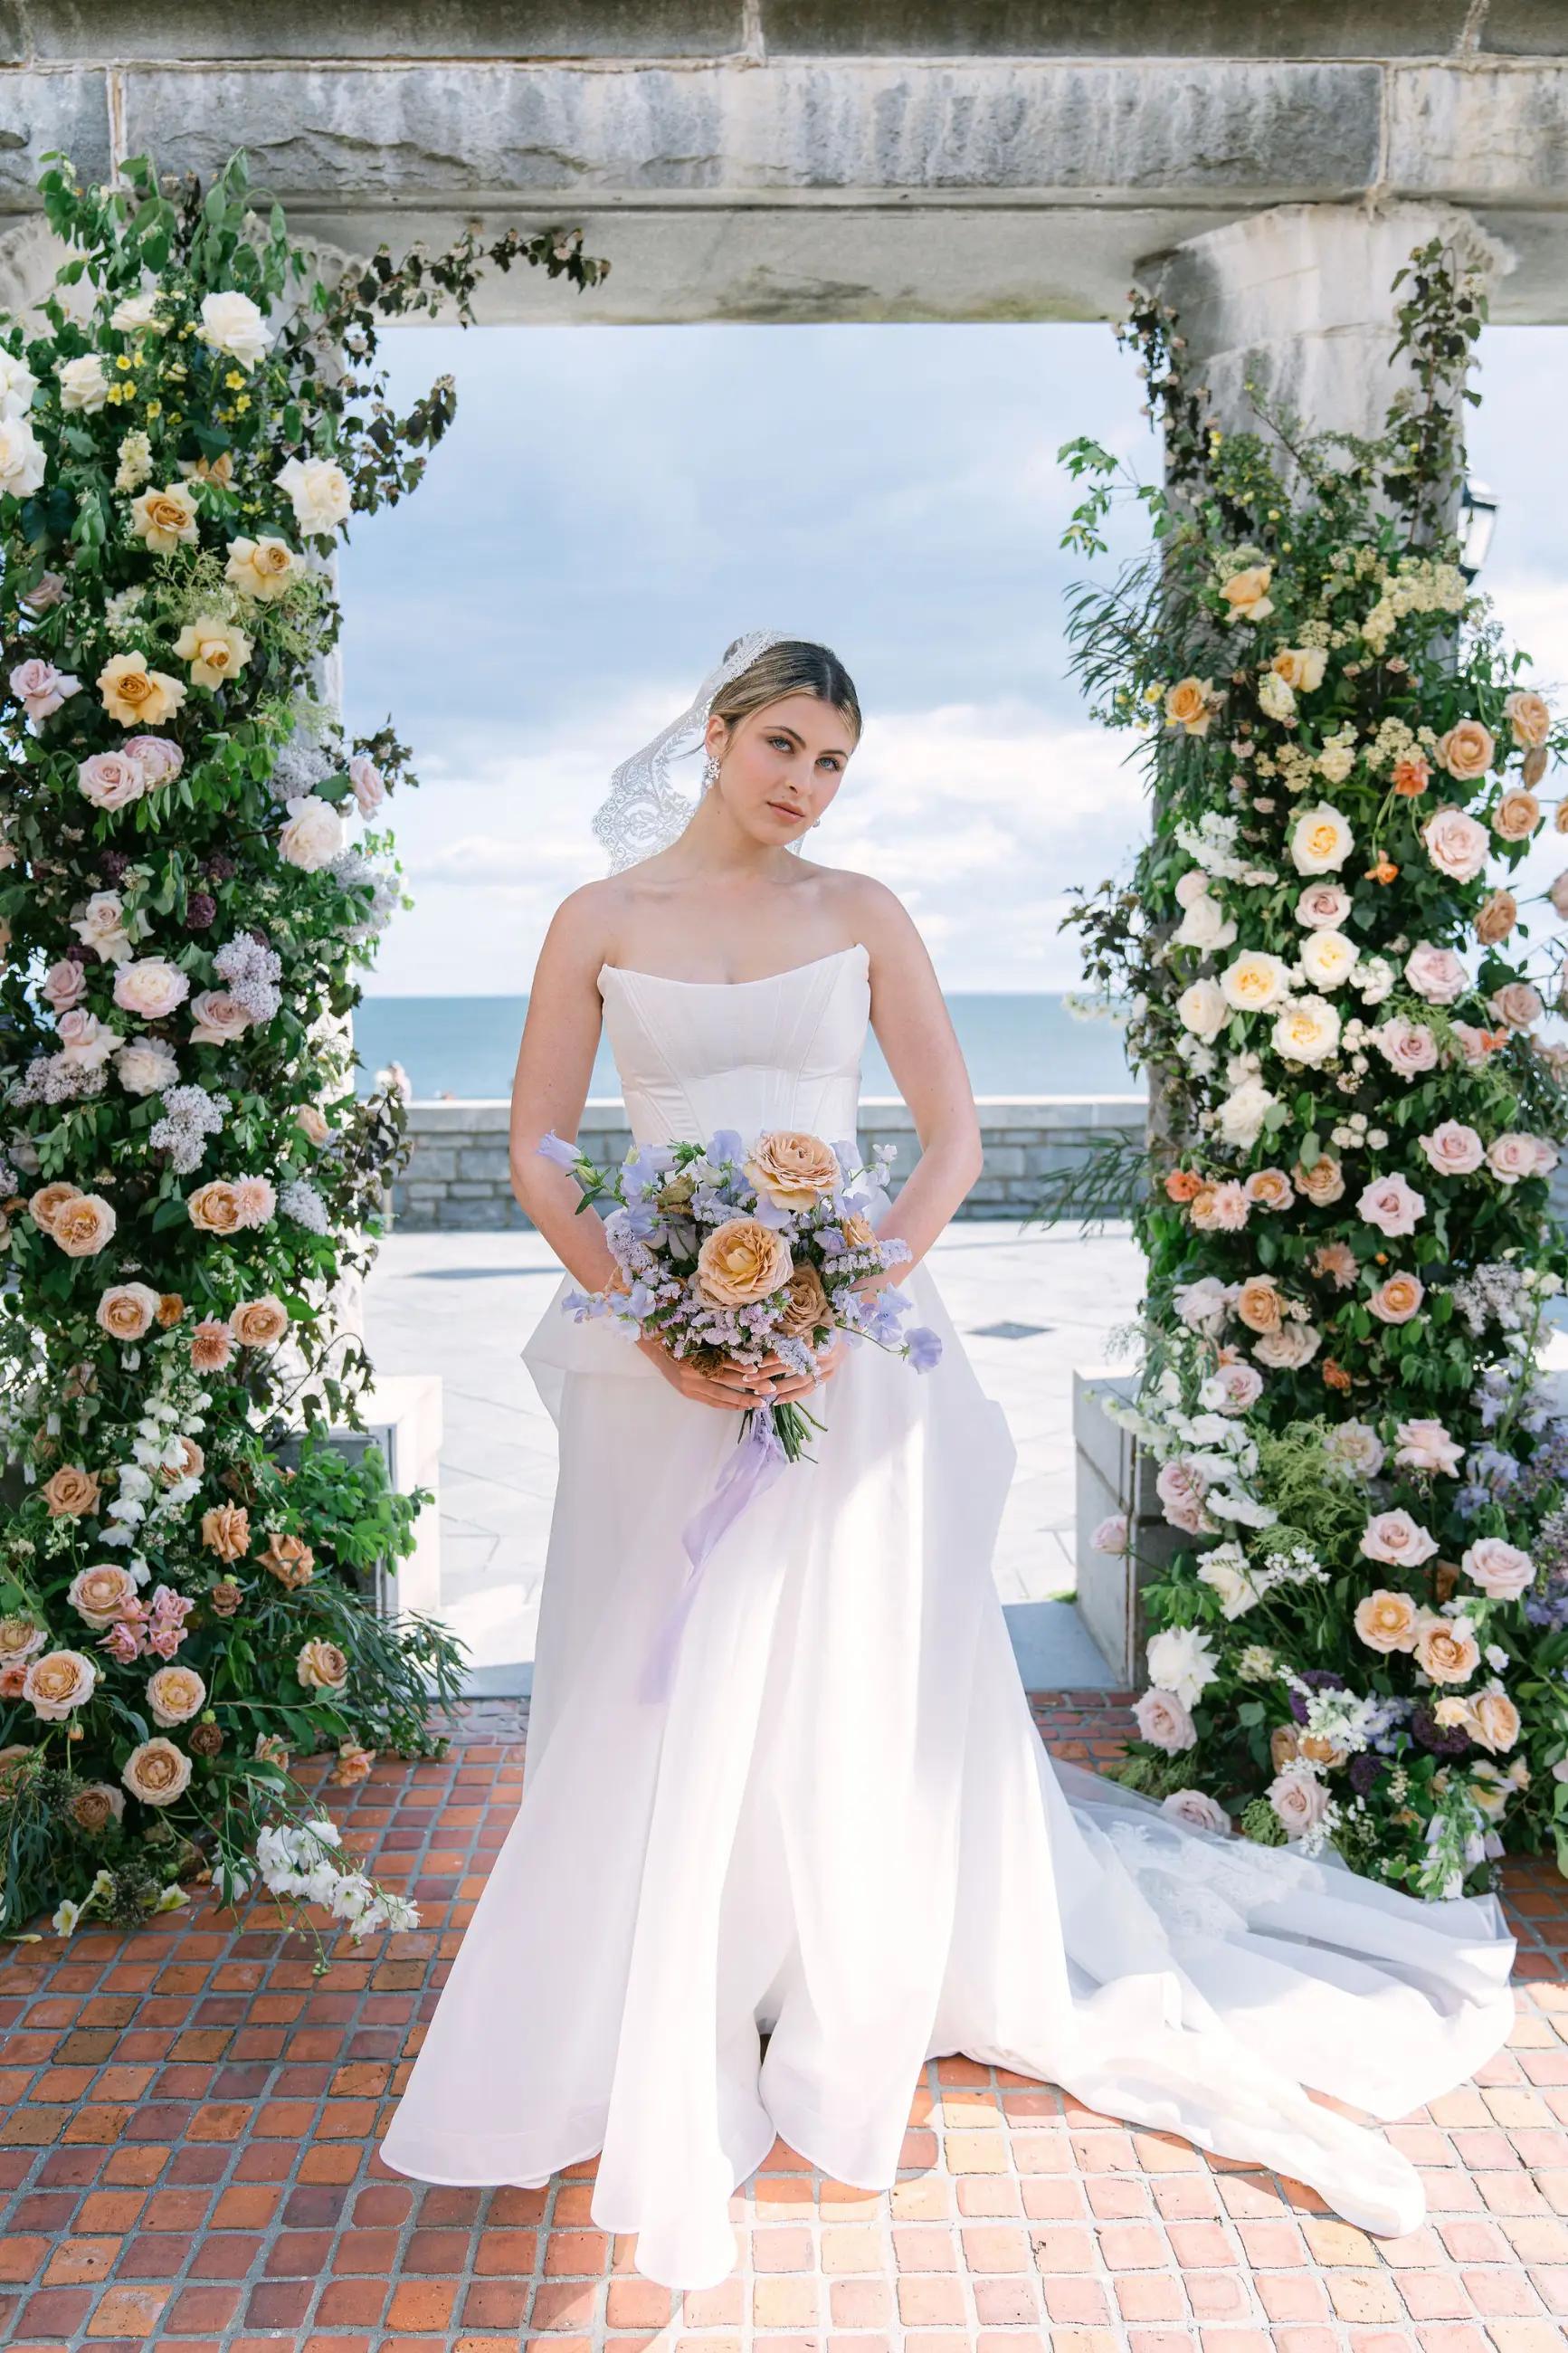 Waterfront Elegance: A Saint Bridal Gown at Branford House Image